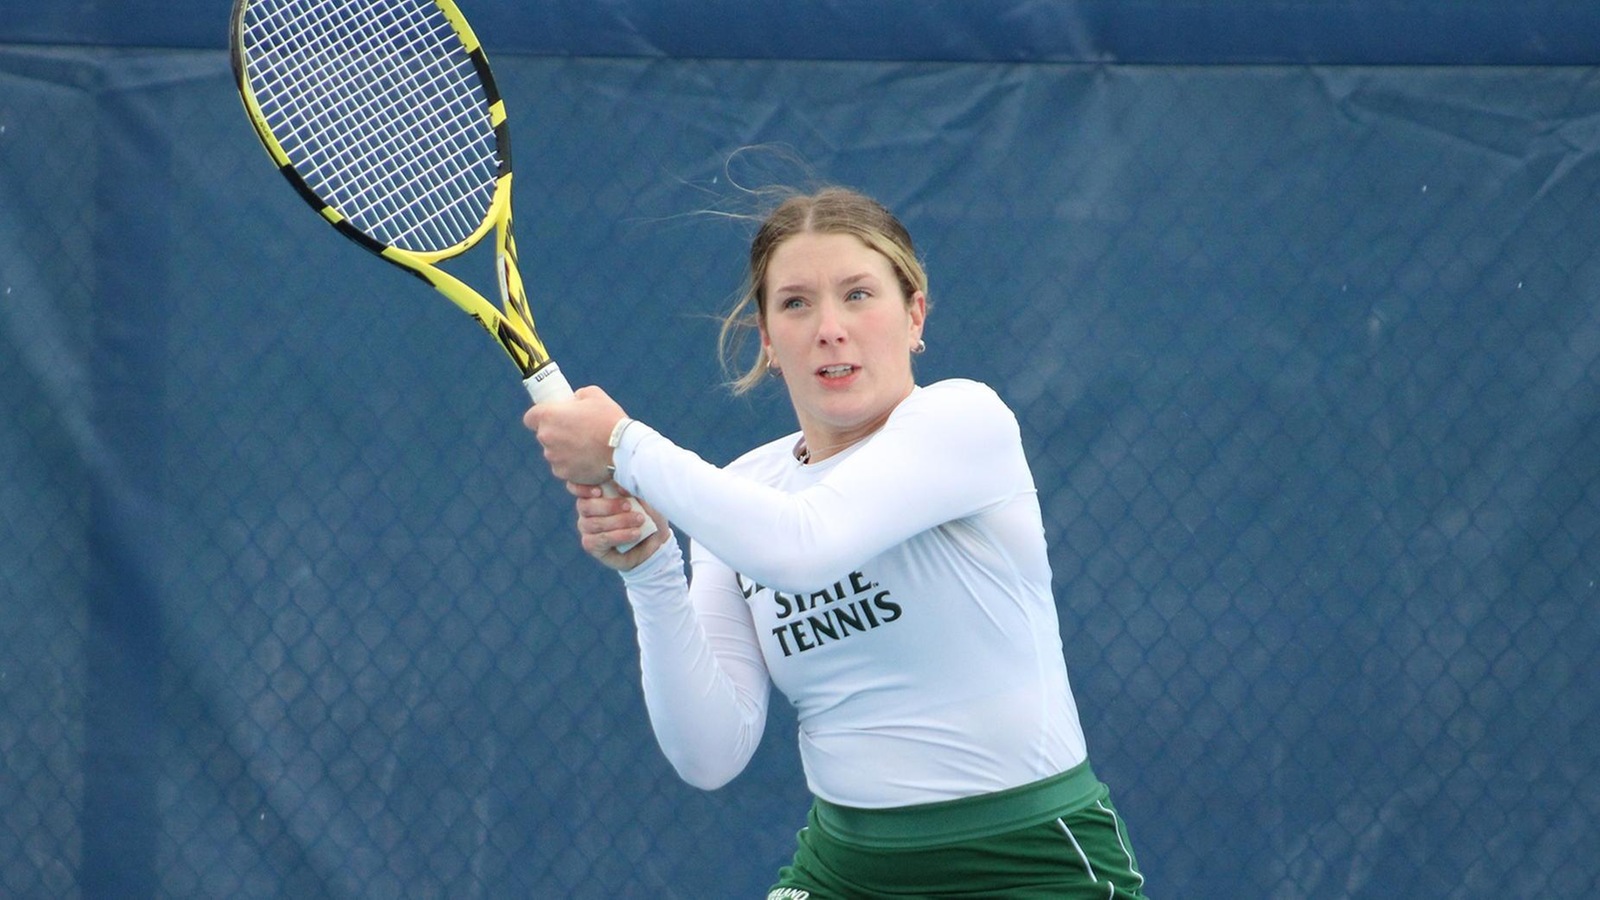 Shorthanded Women’s Tennis Comes Up Short In #HLTennis Semifinals